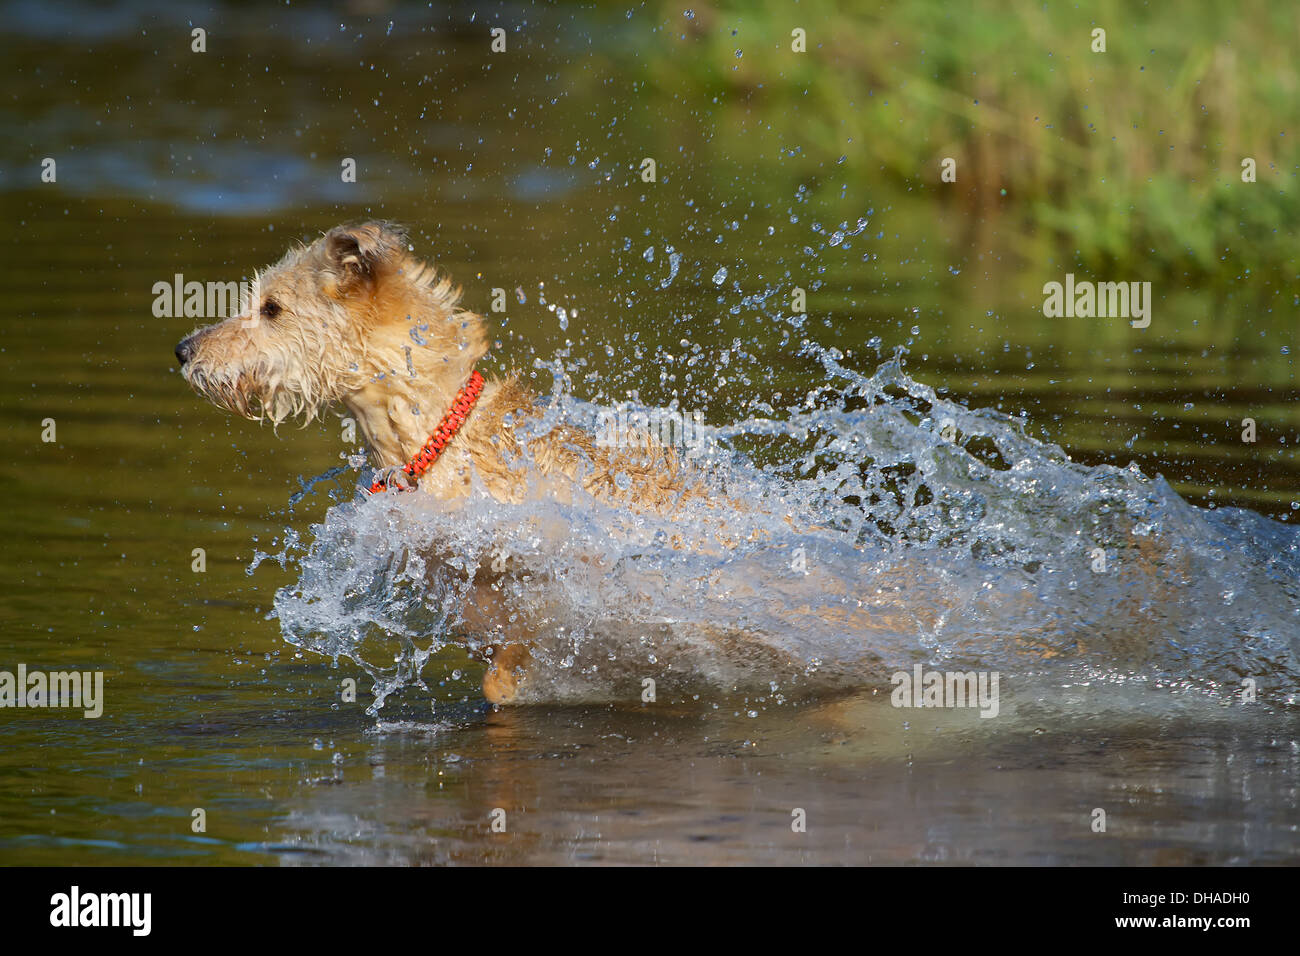 After the ball was thrown into the water chasing the dog Afterwards this. Stock Photo